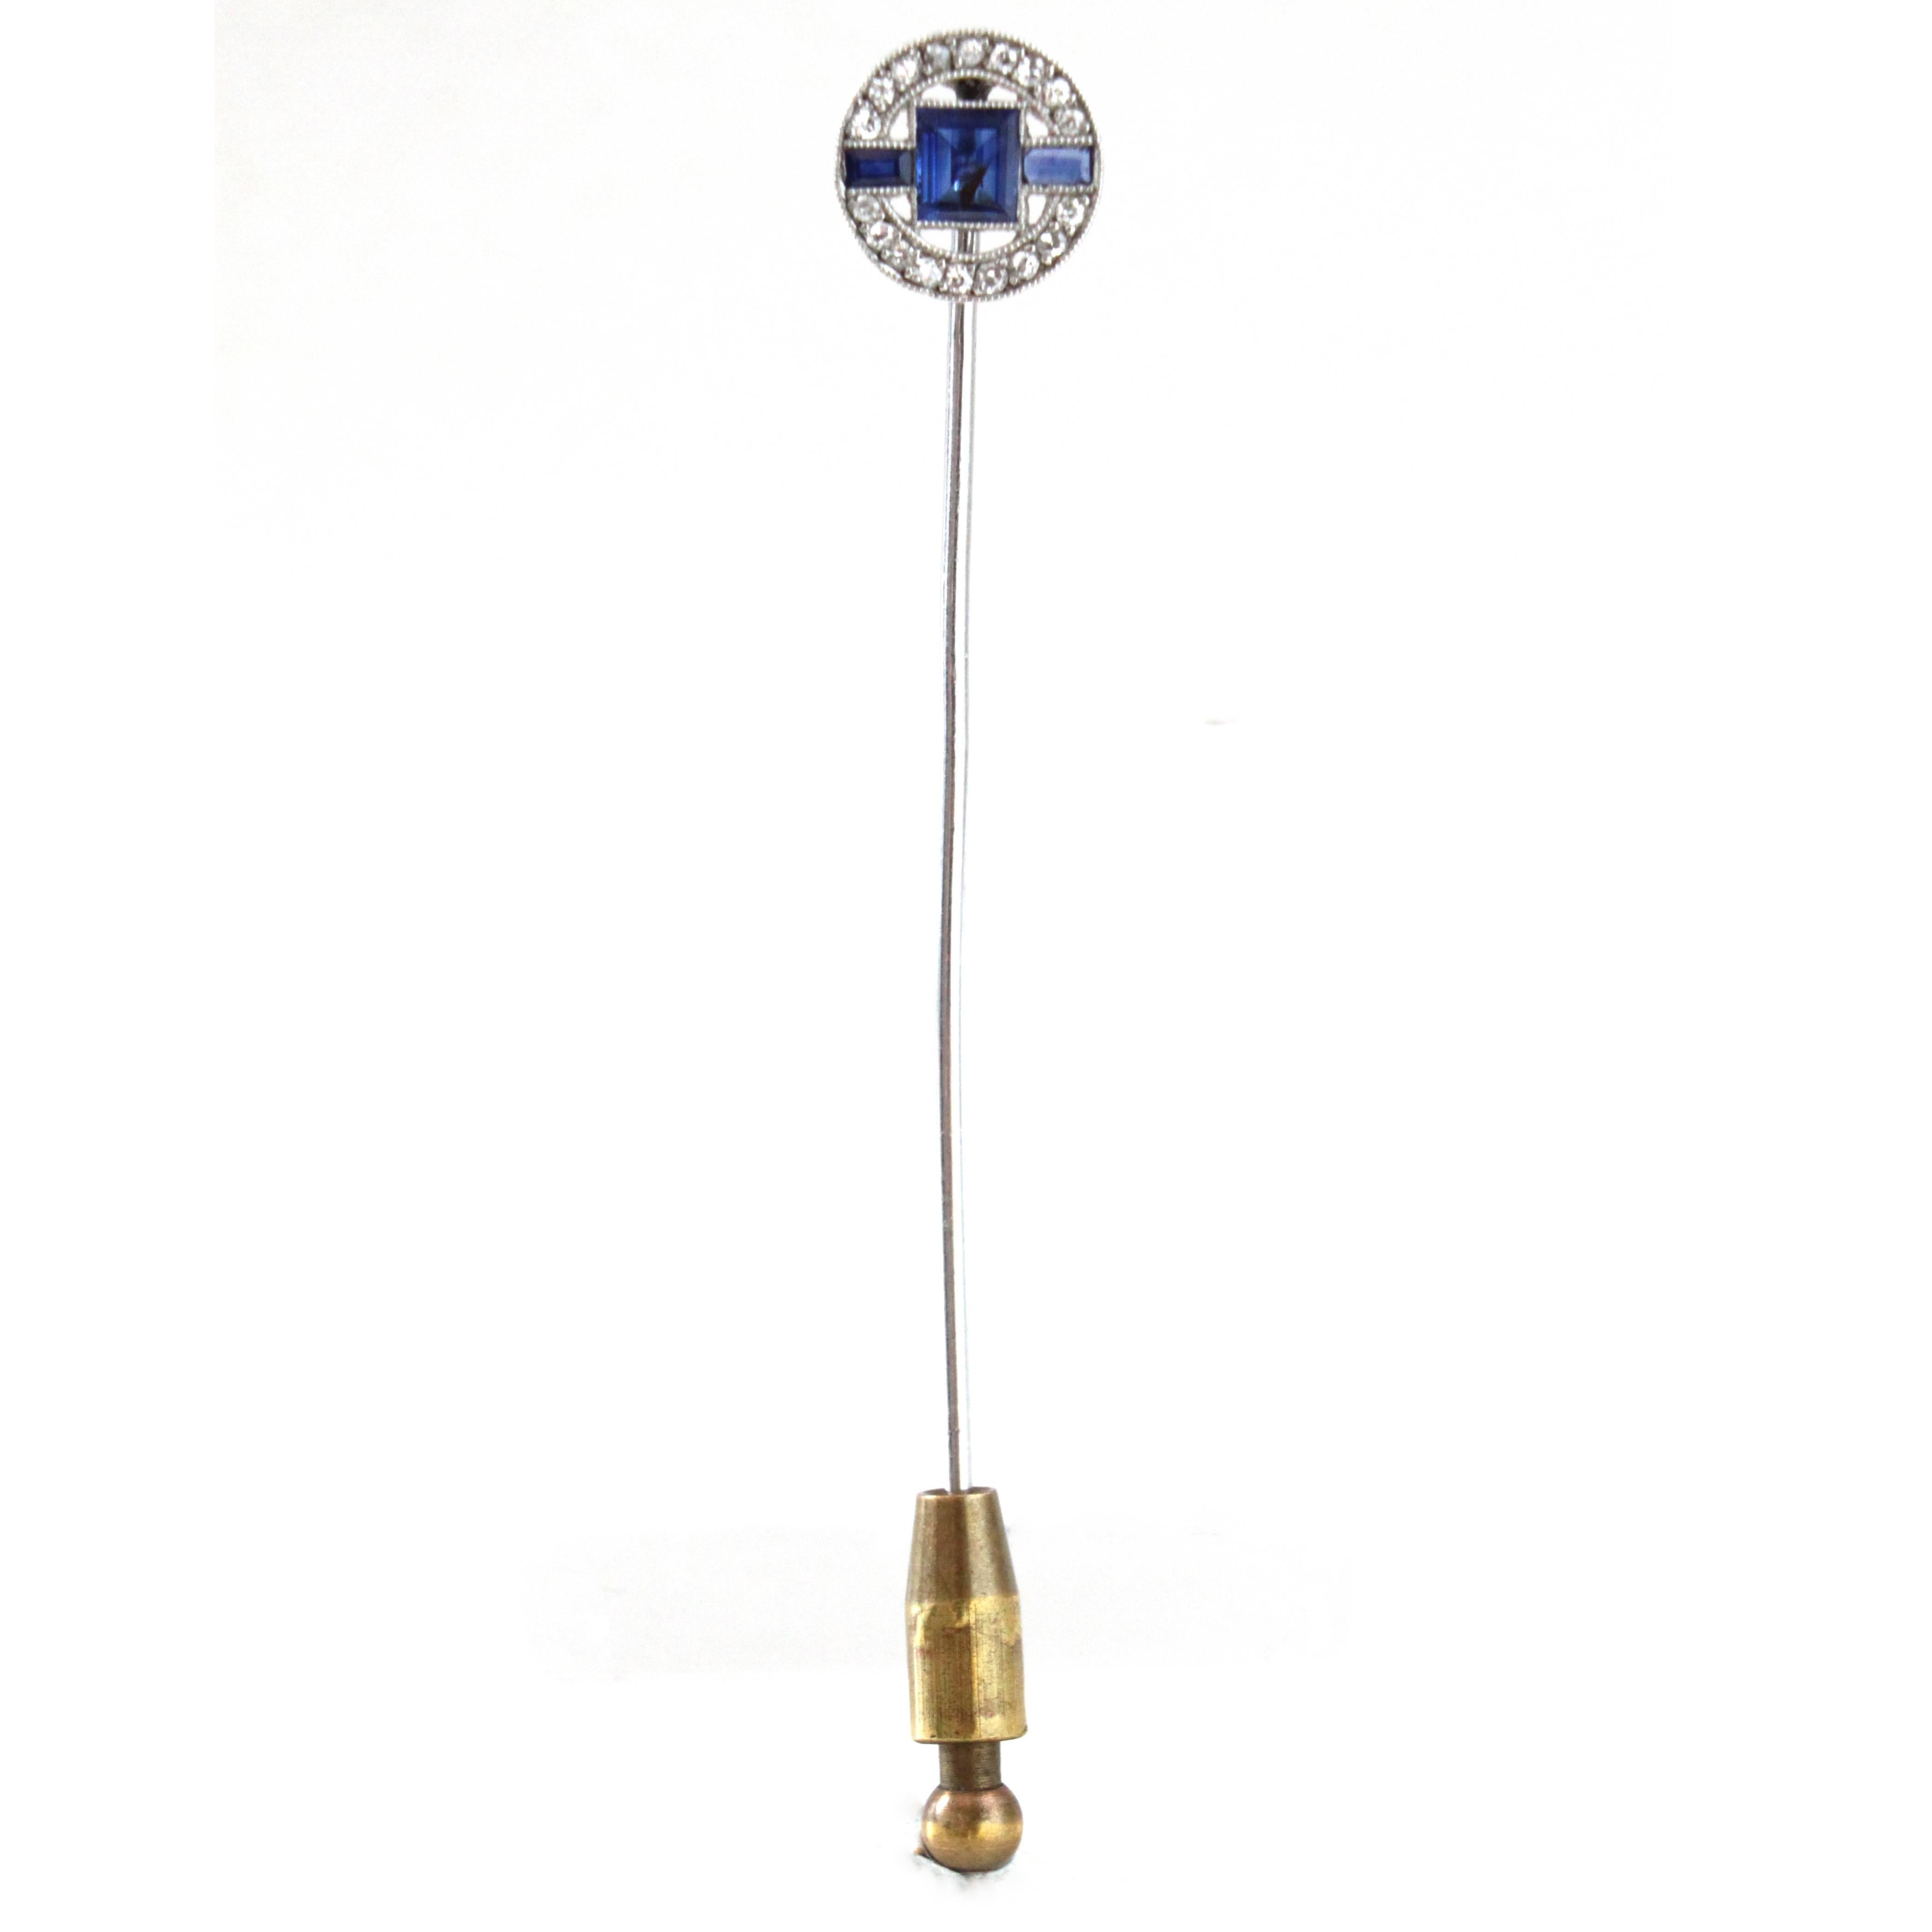 An exquisite Art Deco Sapphire and Diamond Stick Pin, France, ca. 1930s.

The circular head of the pin has in the center a bright rectangular-cut sapphire surrounded by two other sapphires and old-cut diamonds. The piece follows a strong